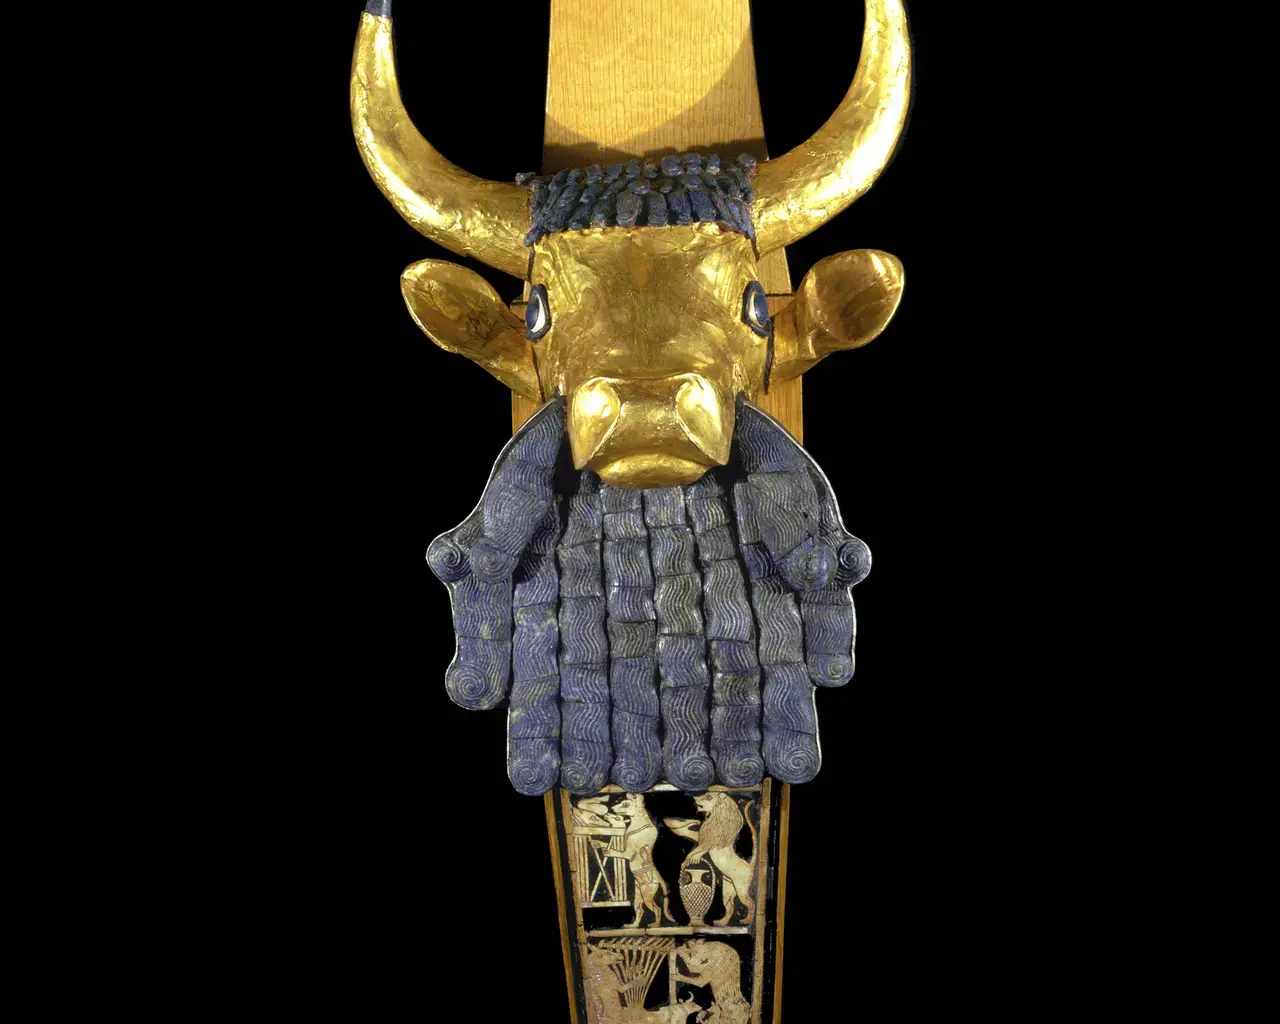 Bull-headed Lyre (head height: 35.6 cm; plaque height: 33 cm) from the Woolley-coined &ldquo;King&rsquo;s Grave&rdquo; royal tomb of Private Grave, 789, constructed with gold, silver, lapis lazuli, shell, bitumen and wood, ca 2550 BCE at Ur. Photo courtesy of Penn Museum.